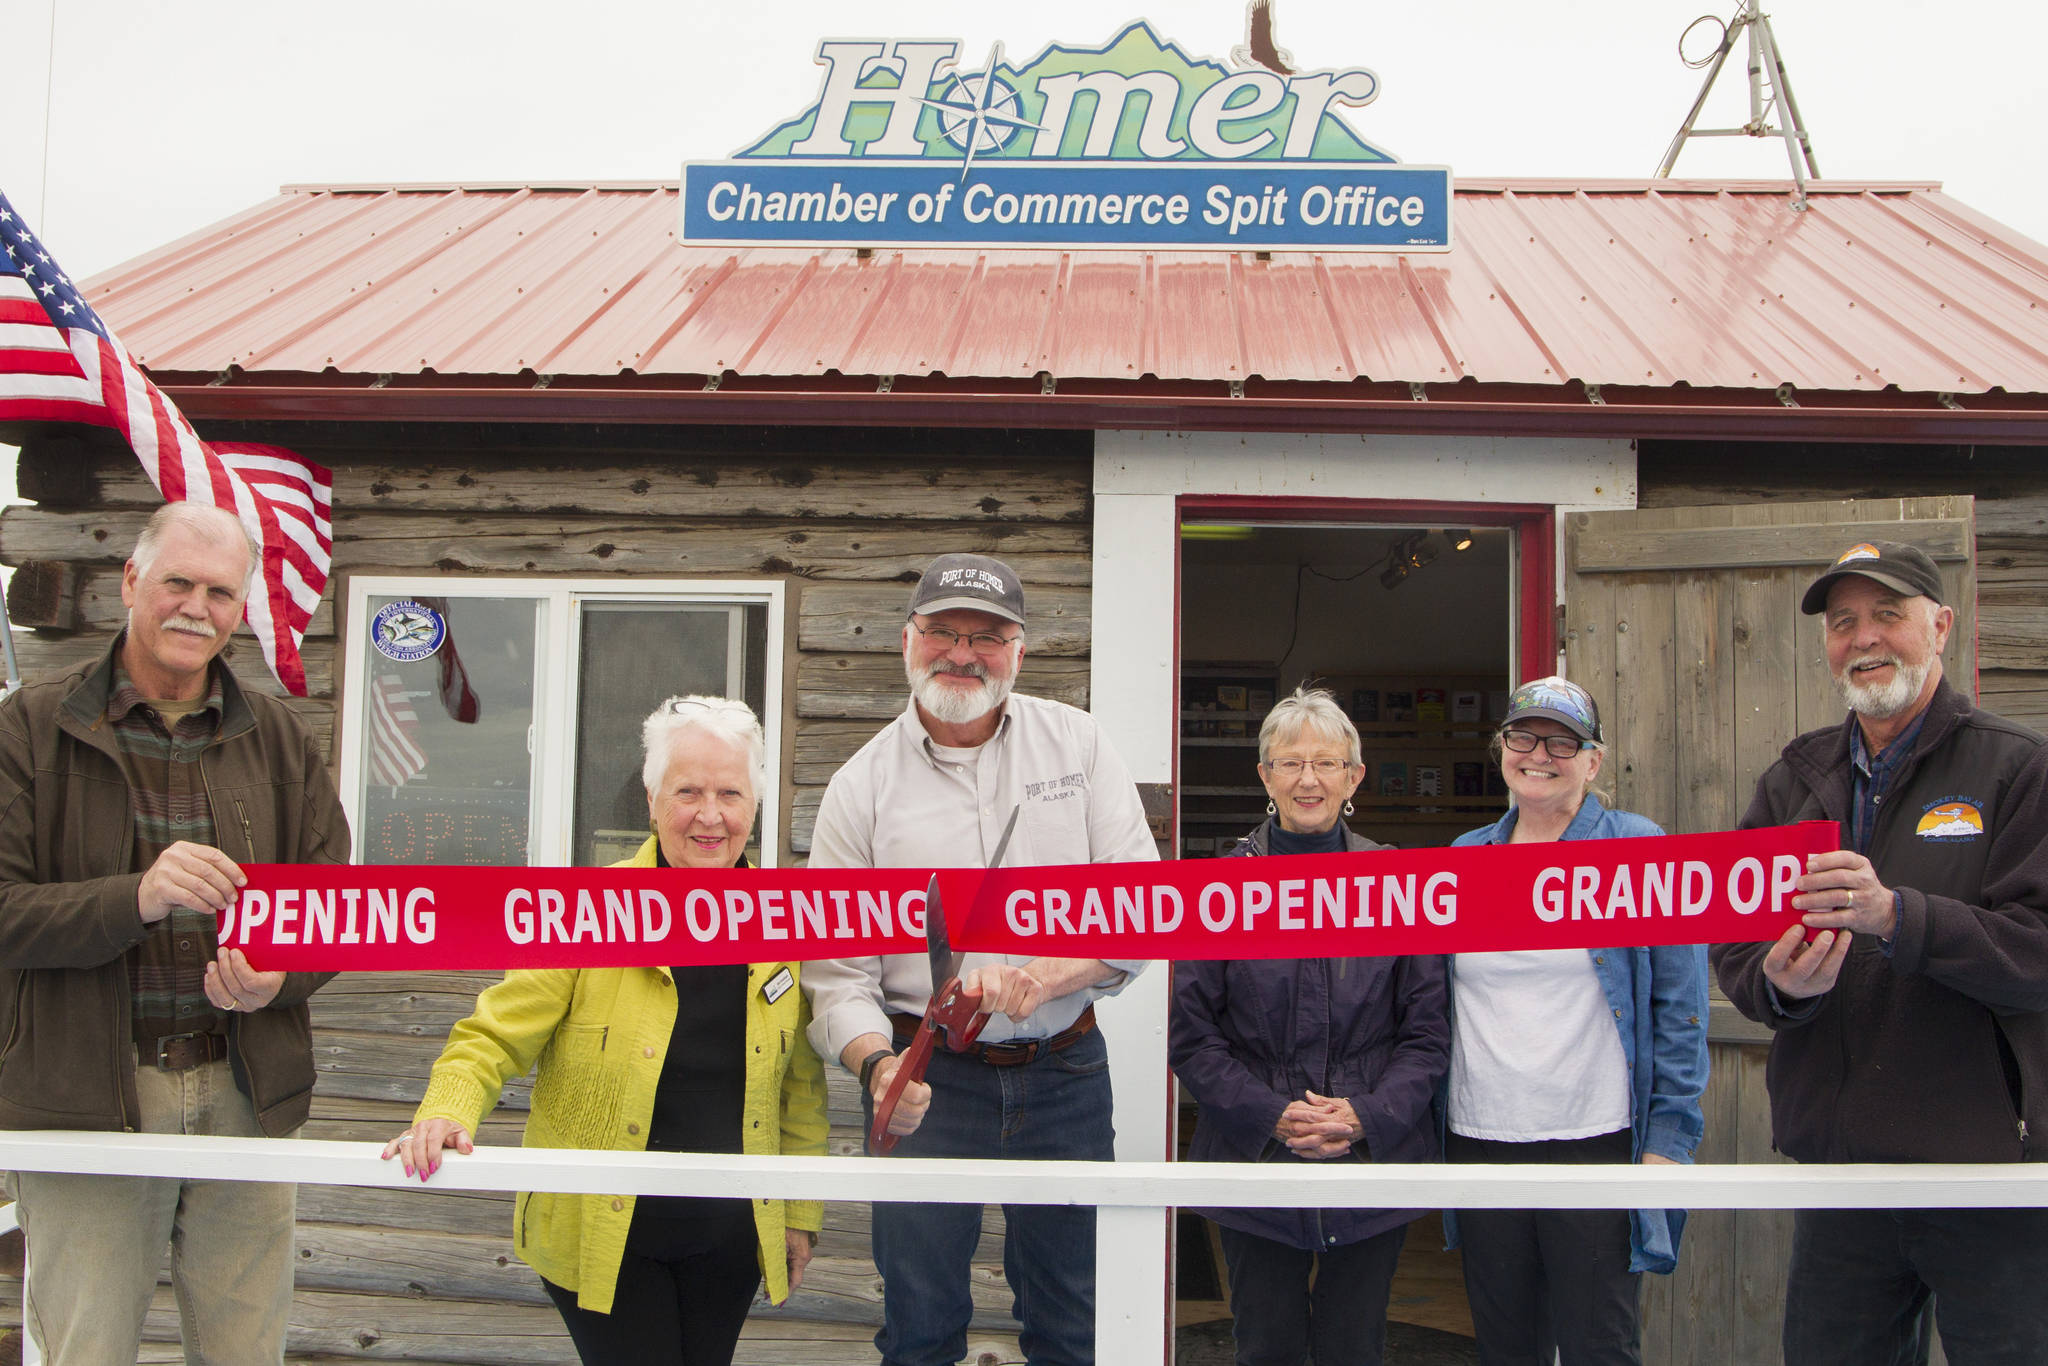 The Homer Chamber of Commerce and Visitor Center hosted a grand opening and ribbon-cutting ceremony for the new Homer Spit Visitor Information Center July 1. The office, located near Ramp 4 on the Homer Spit, will be open Thursdays through Sundays, July 1-Sept. 5 to offer information about Homer to visitors. (Photo by Sarah Knapp/Homer News)